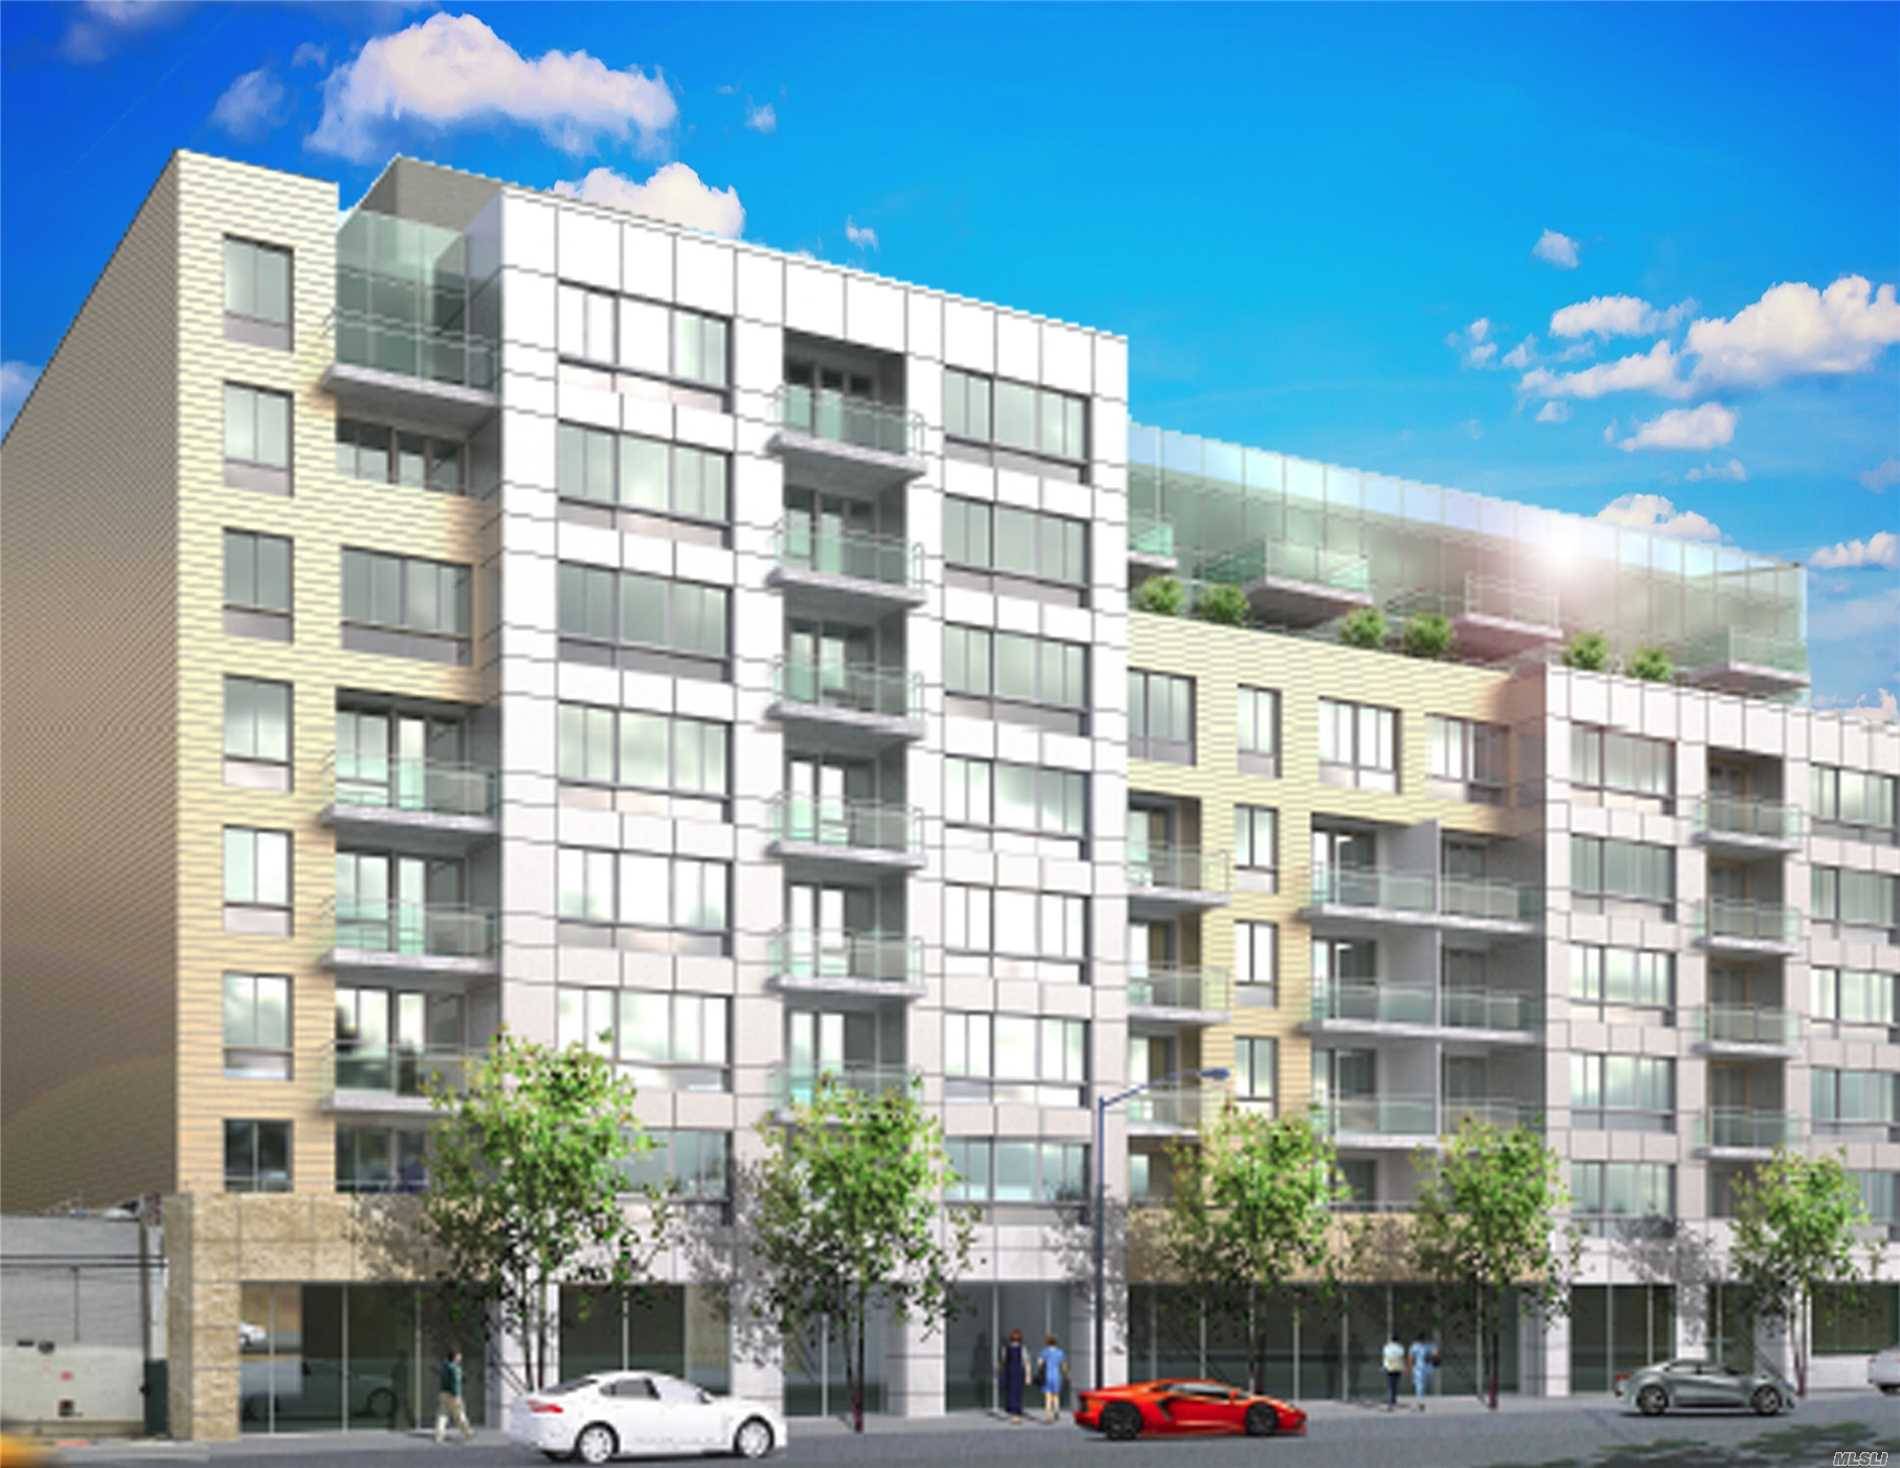 Brand New Construction Luxury Condominium, Super Convenient Location, Near Shopping And Restaurant, Only 1 Block Away From M R Subway Train, 2 Mins To Bus Station, Bank, Park And Supermarket, ...